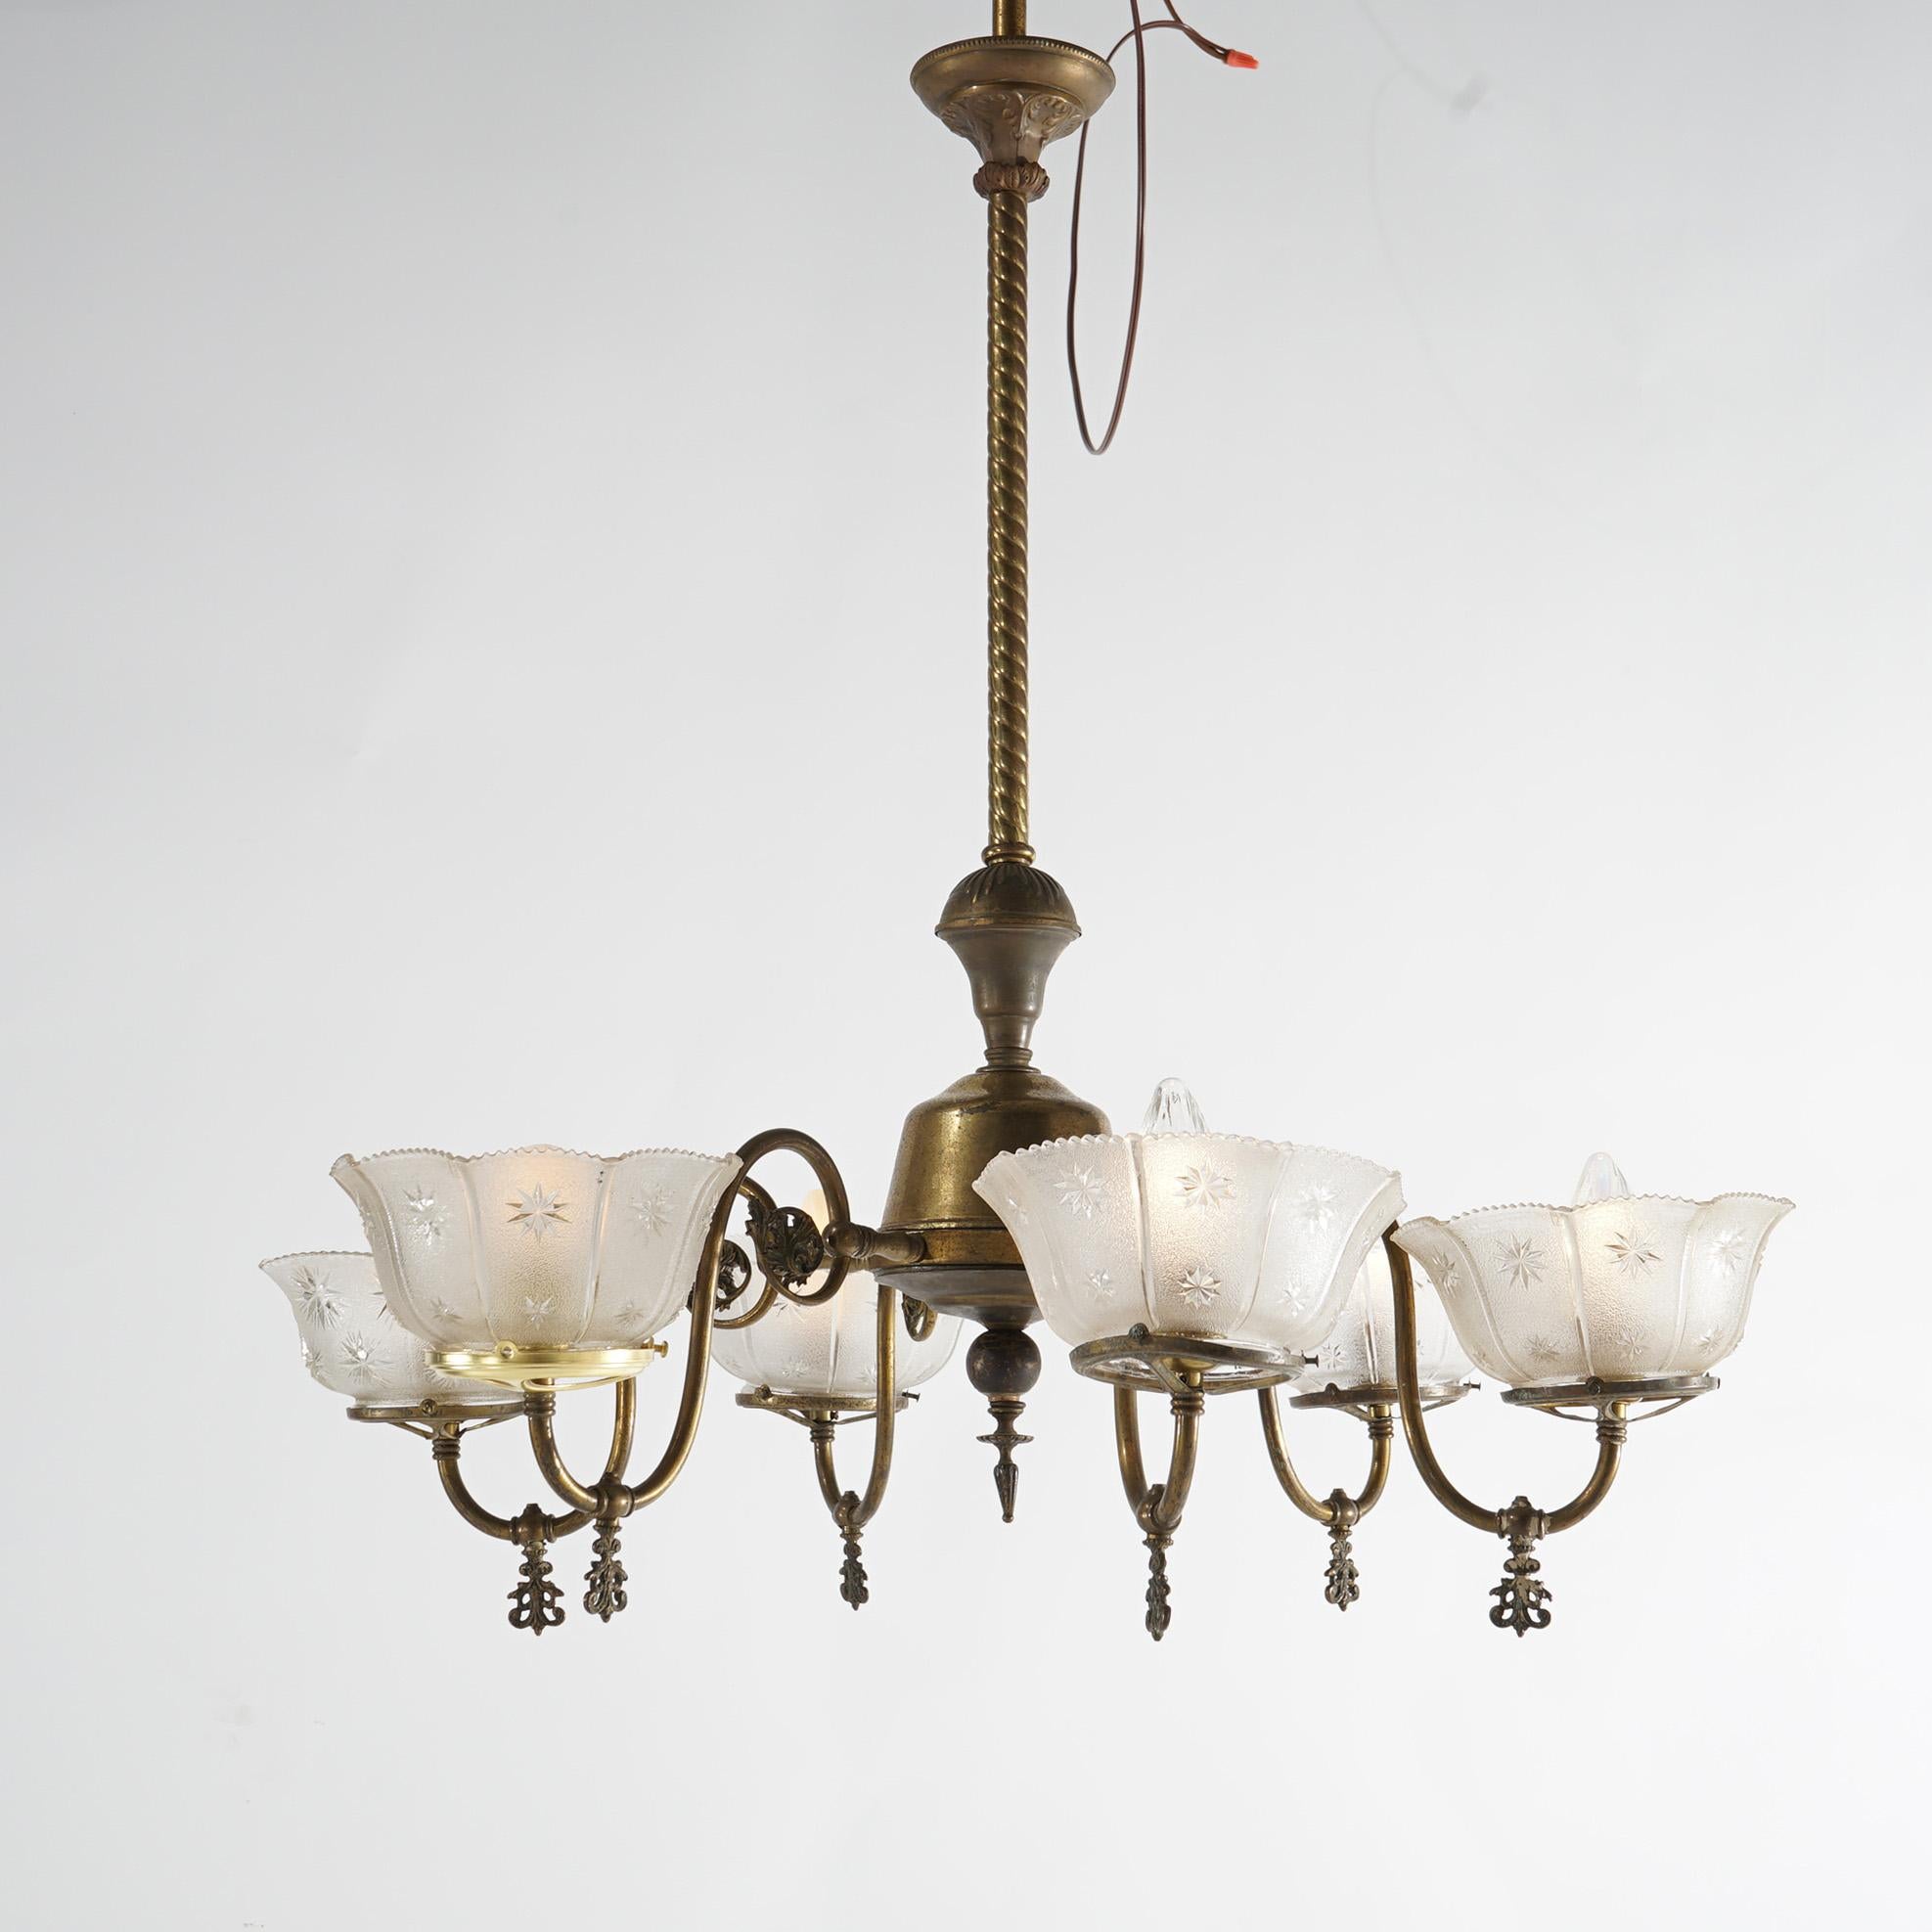 Antique Six Arm Brass Gas Chandelier with Glass Shades, Electrified, Circa 1890 9